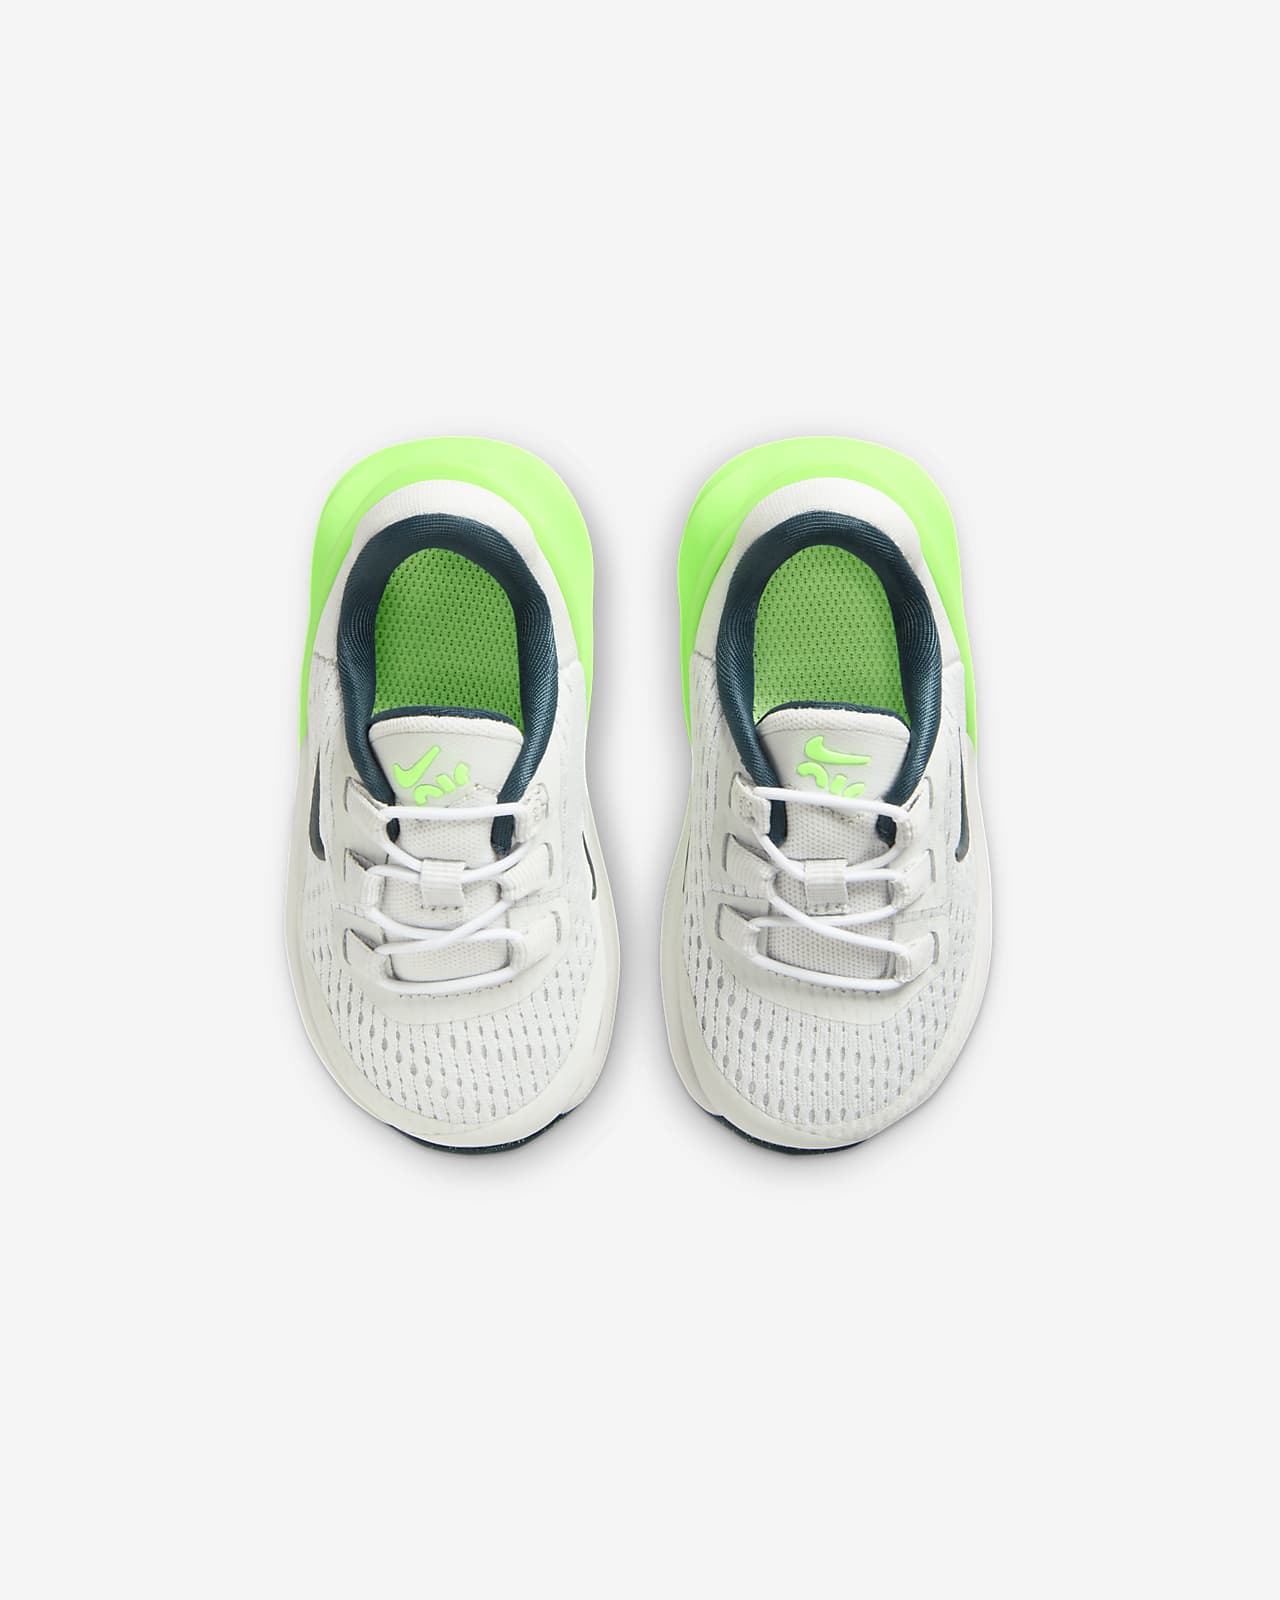 Nike Air Max 270 Baby/Toddler Shoes